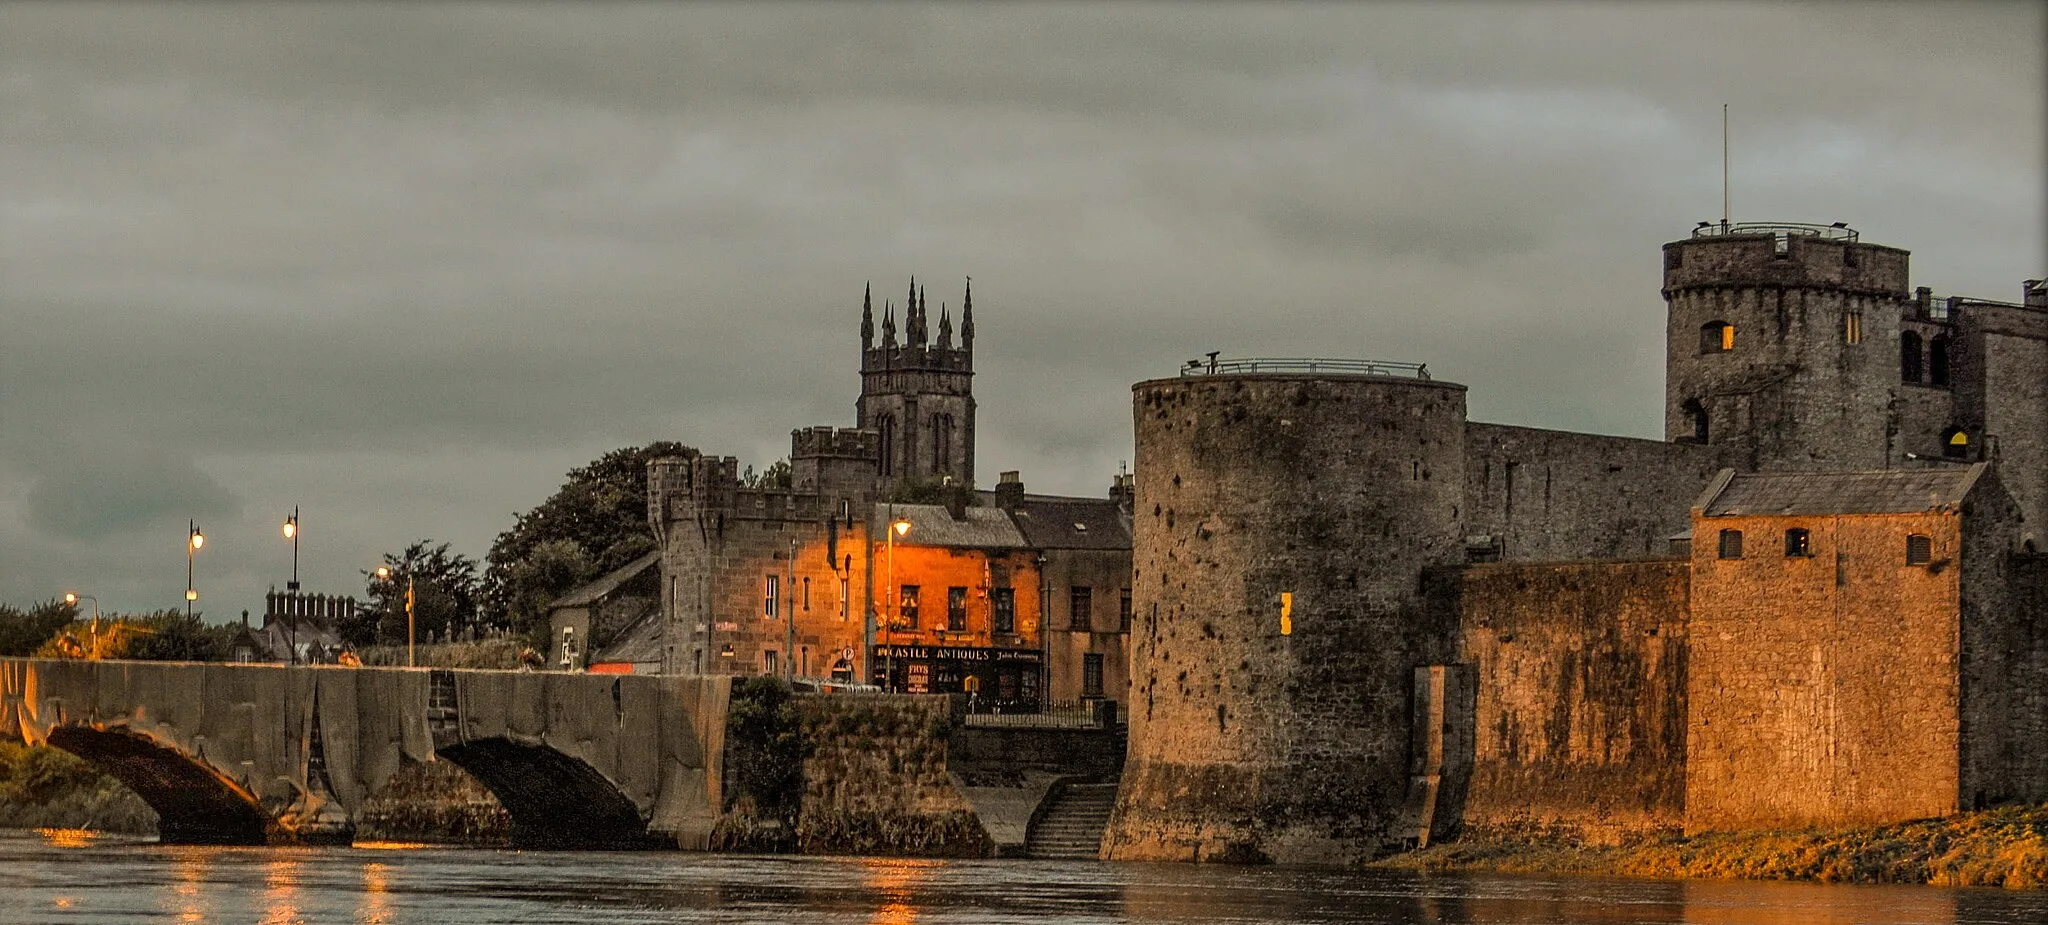 Photo showing: Kings Castle overlooking the river Shannon at the twilight hour.